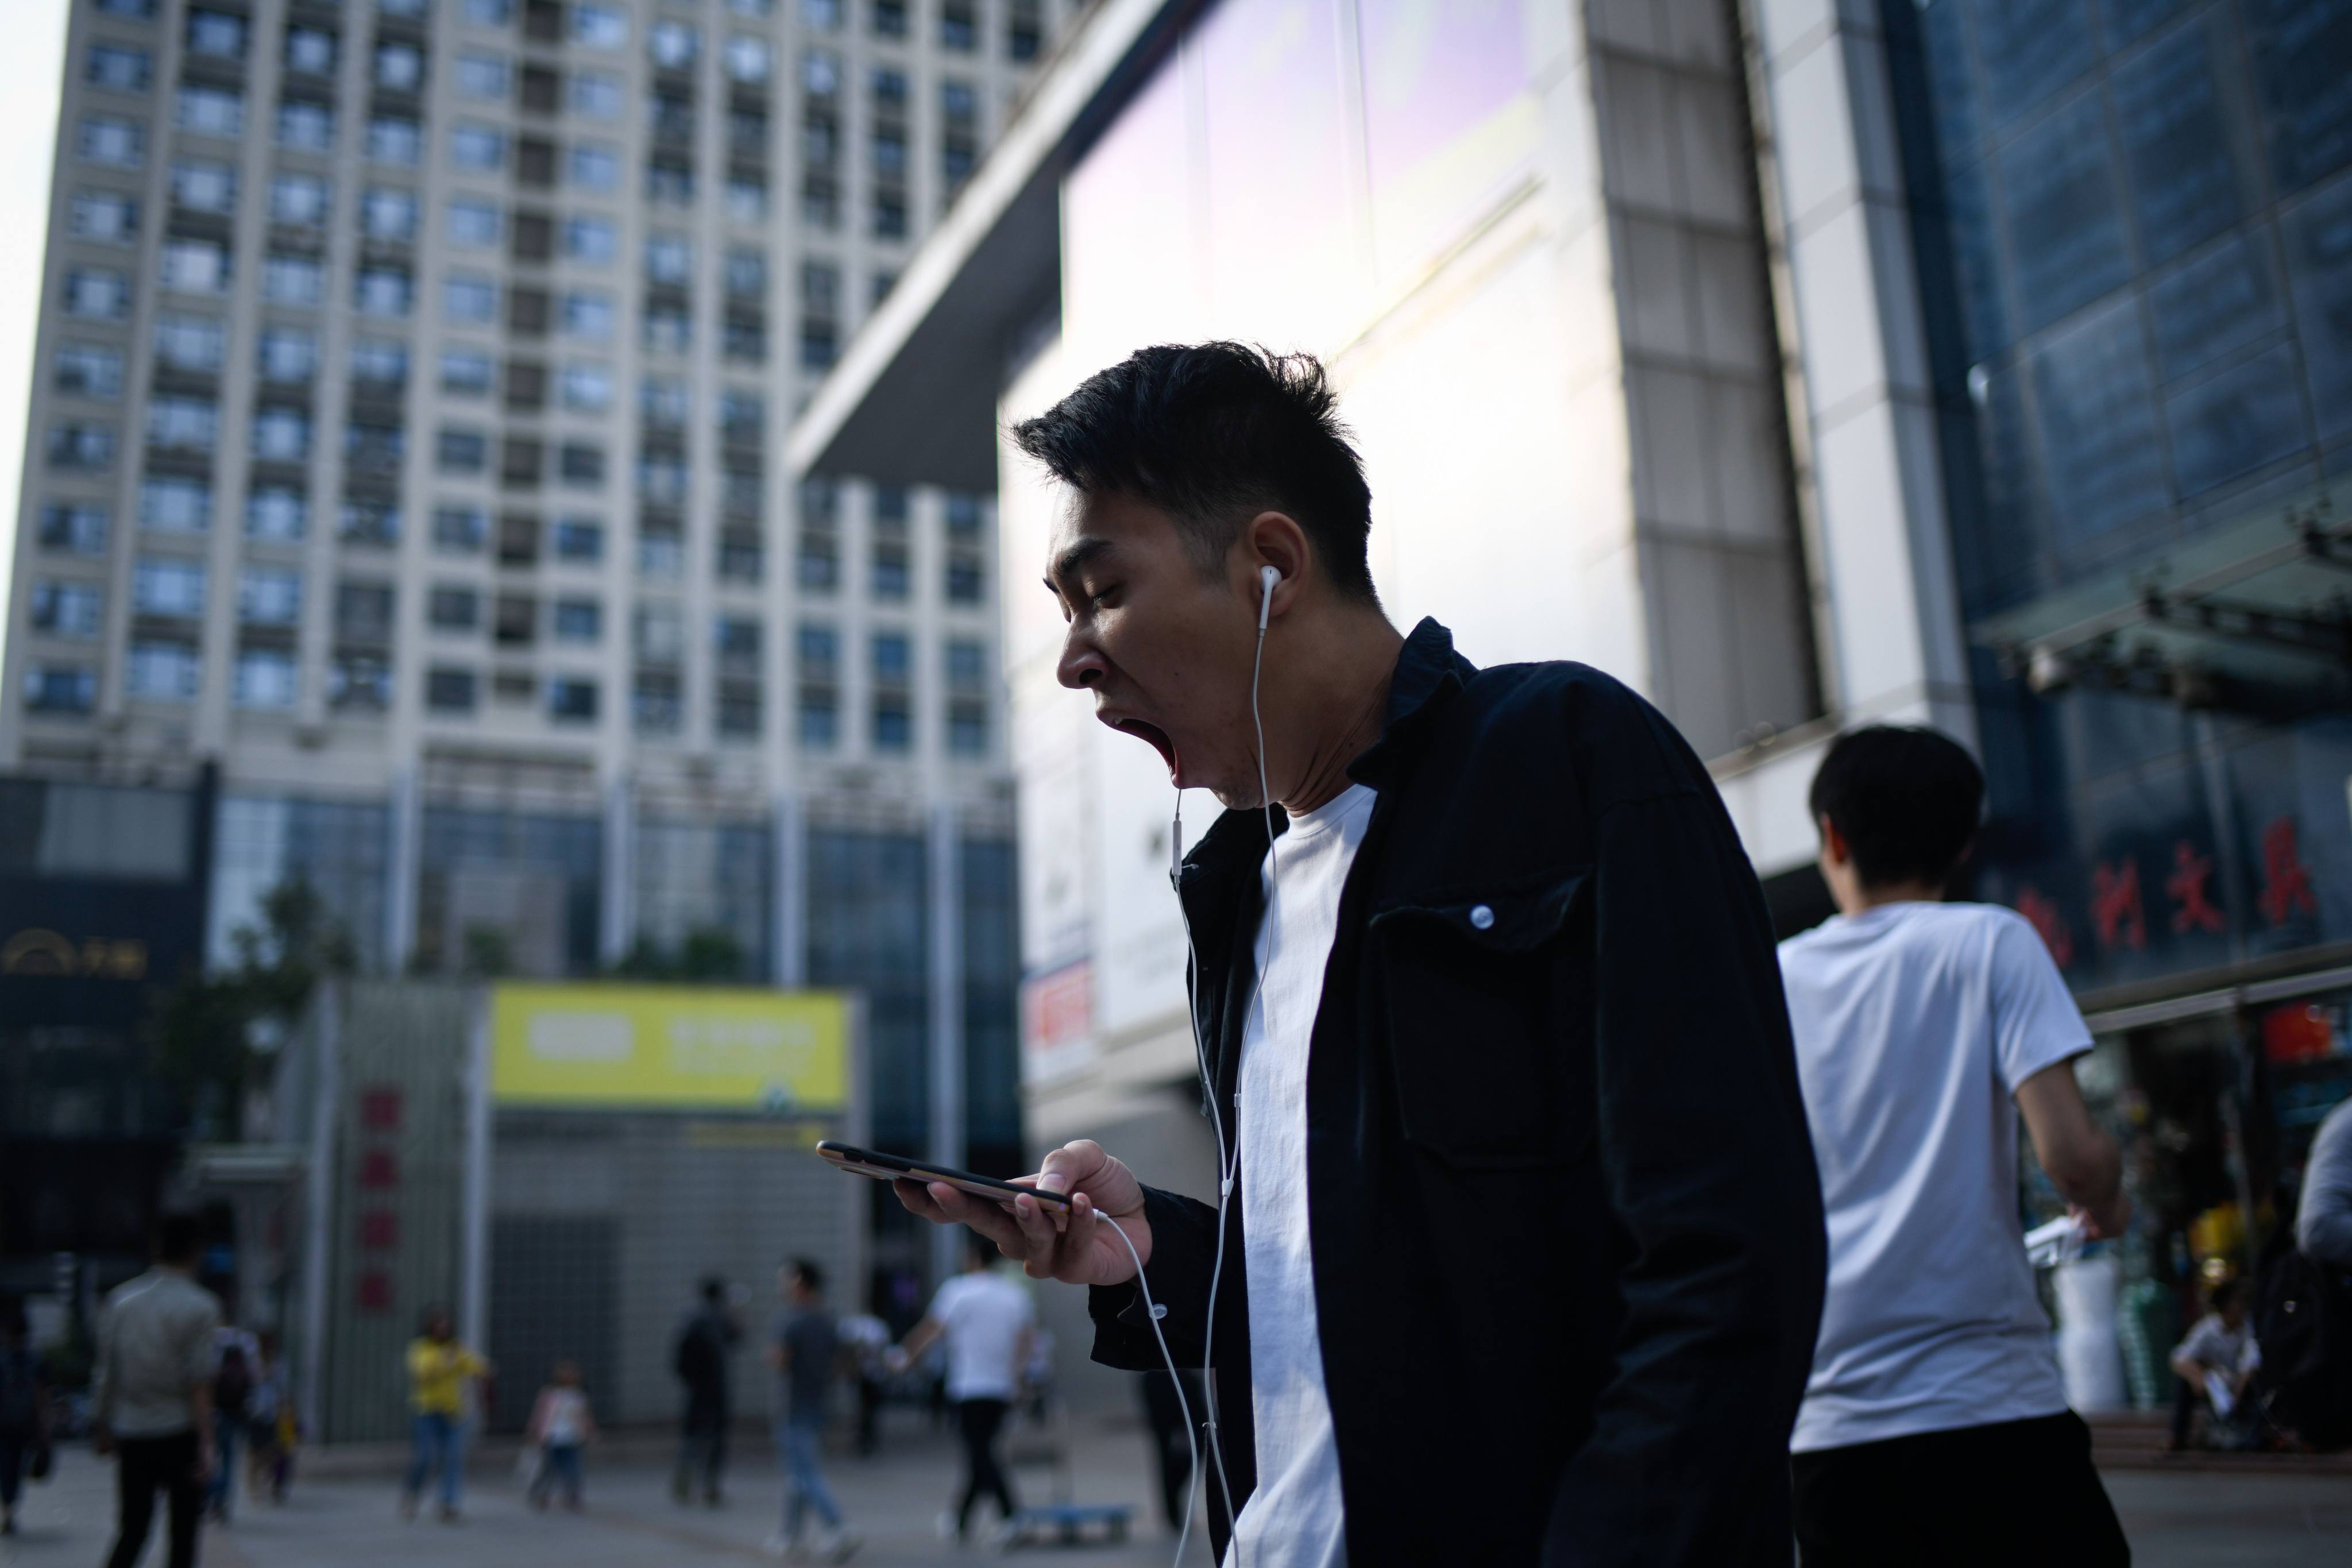 A man yawns as he walks down a street in Shenzhen in 2018. Young tech employees in China have taken to the internet to complain about long working hours. Photo: AFP